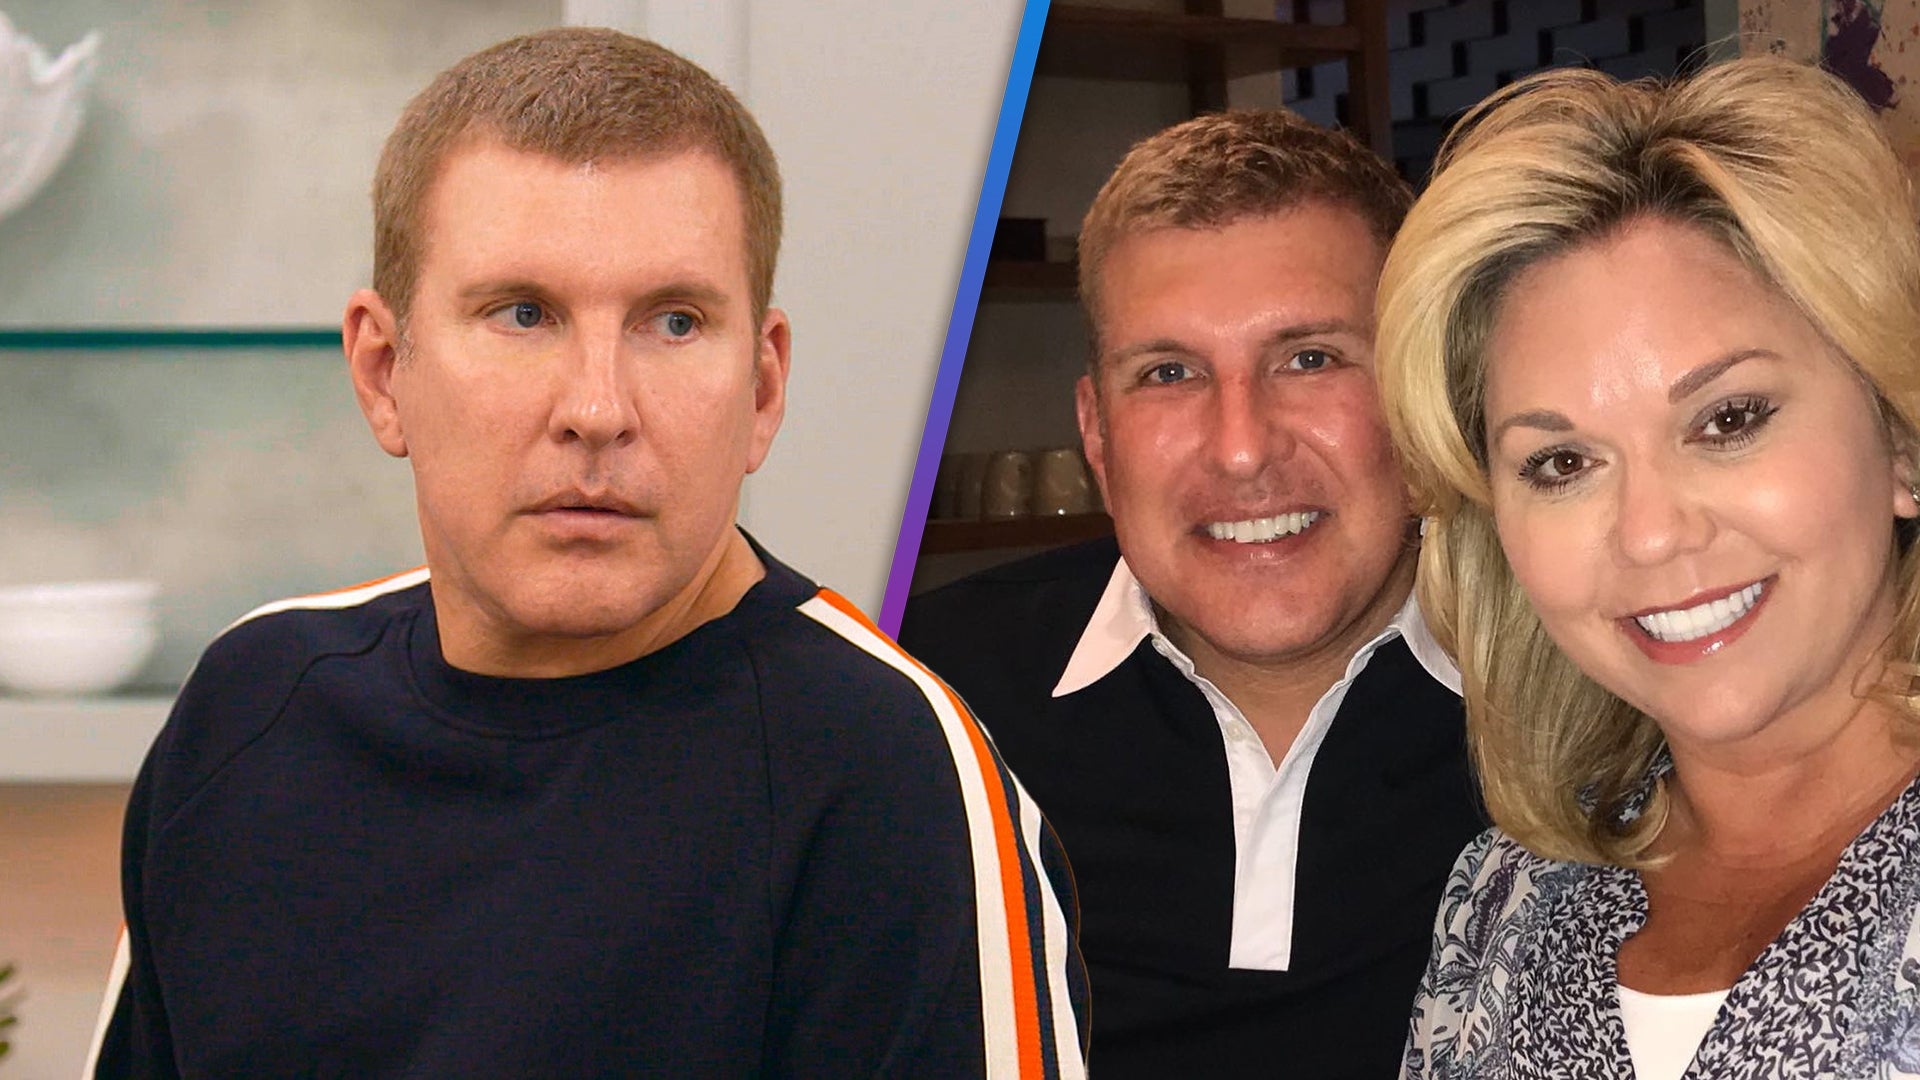 Todd Chrisley Believes There's 'Signs' the World Is Ending While Awaiting Prison Sentence 